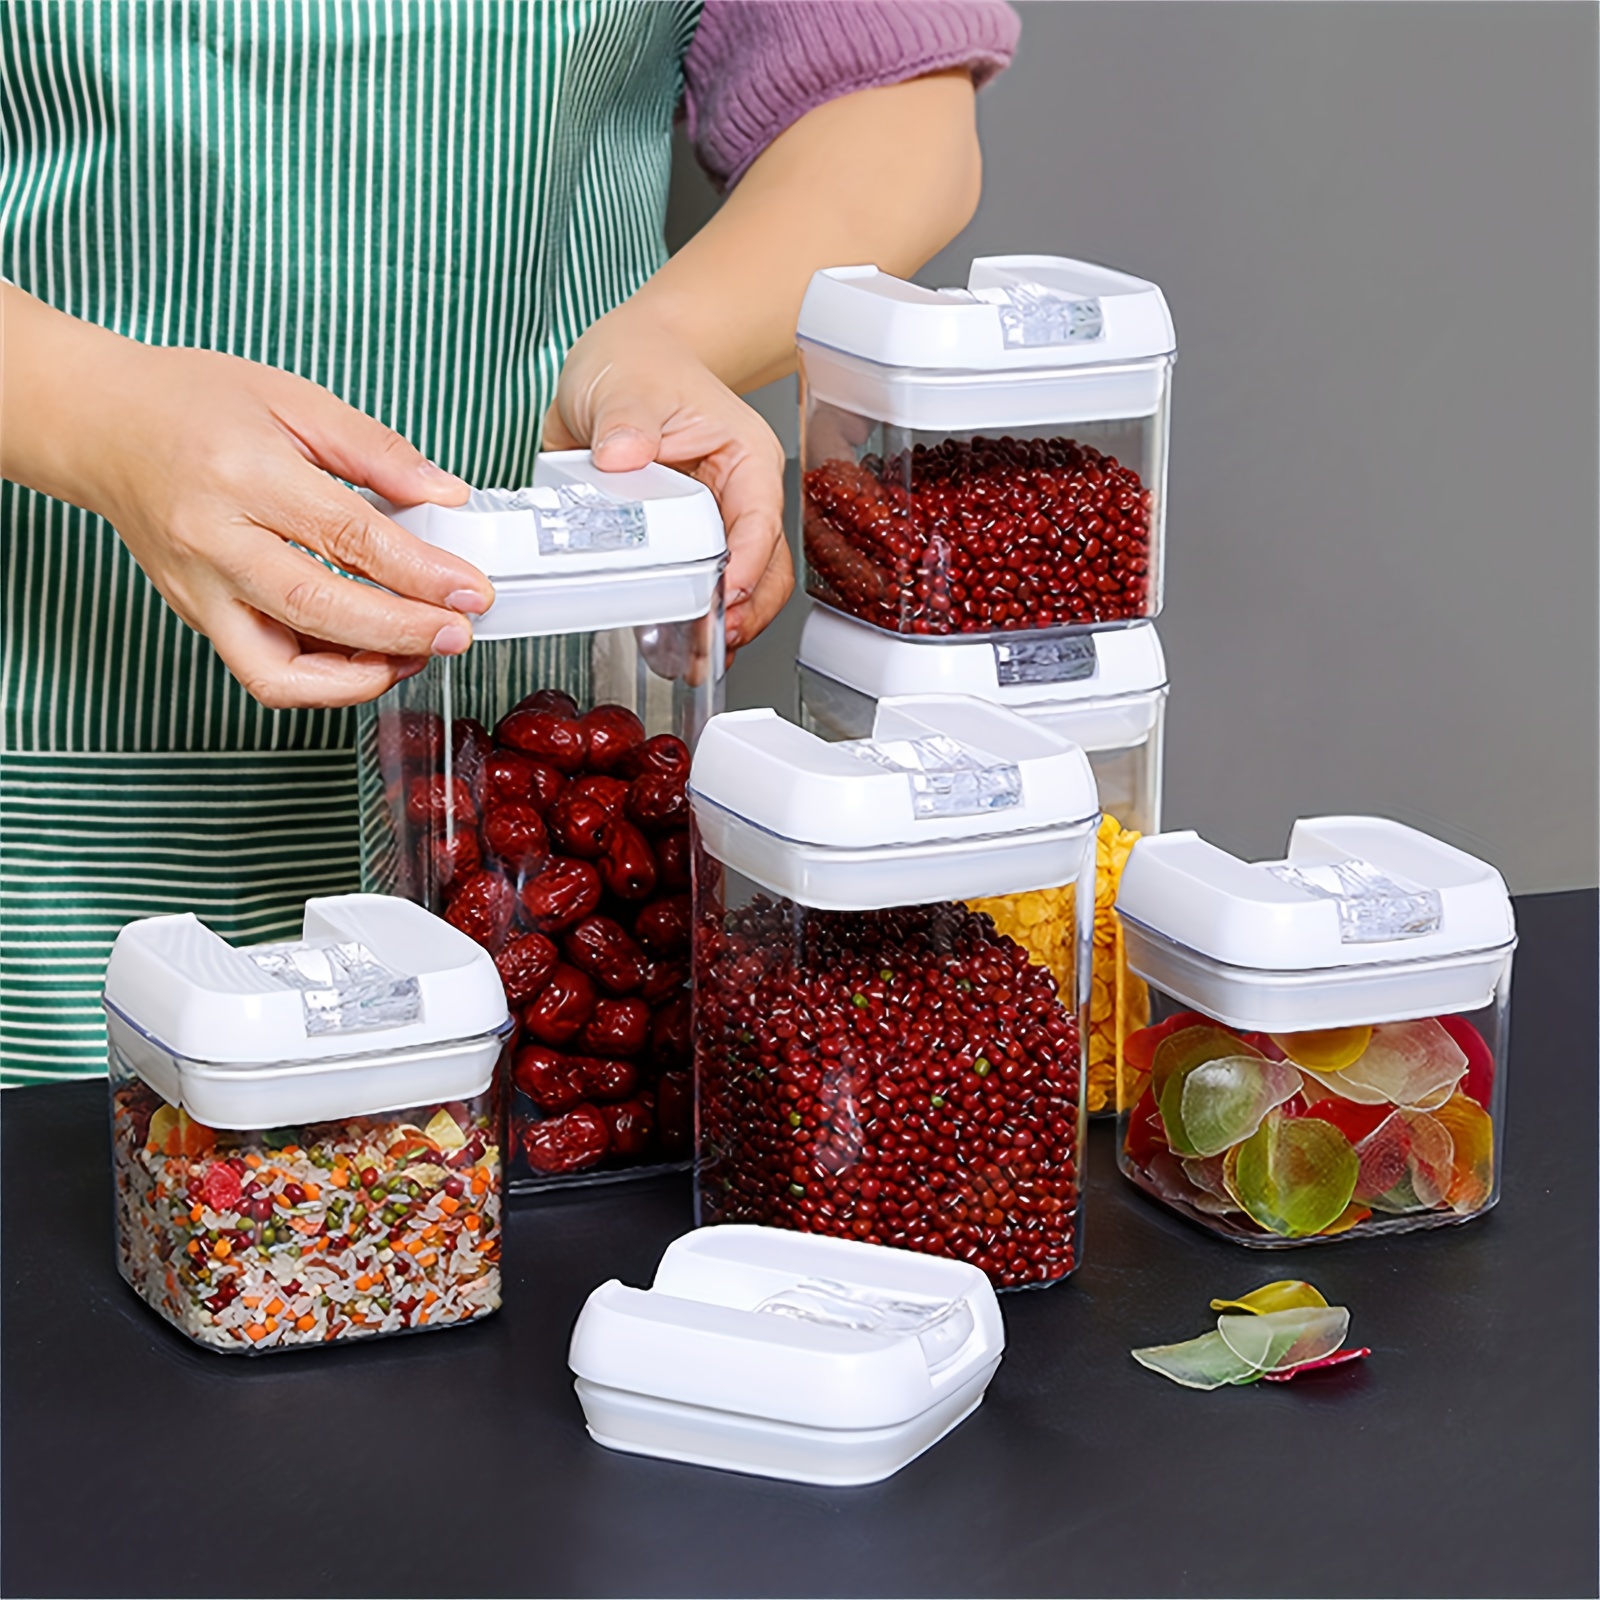 Airtight Food Storage Containers With Lid Pantry Organizer Cereal Dispenser  Cereal Containers Food Storage Box Kitchen Organizer -1pc